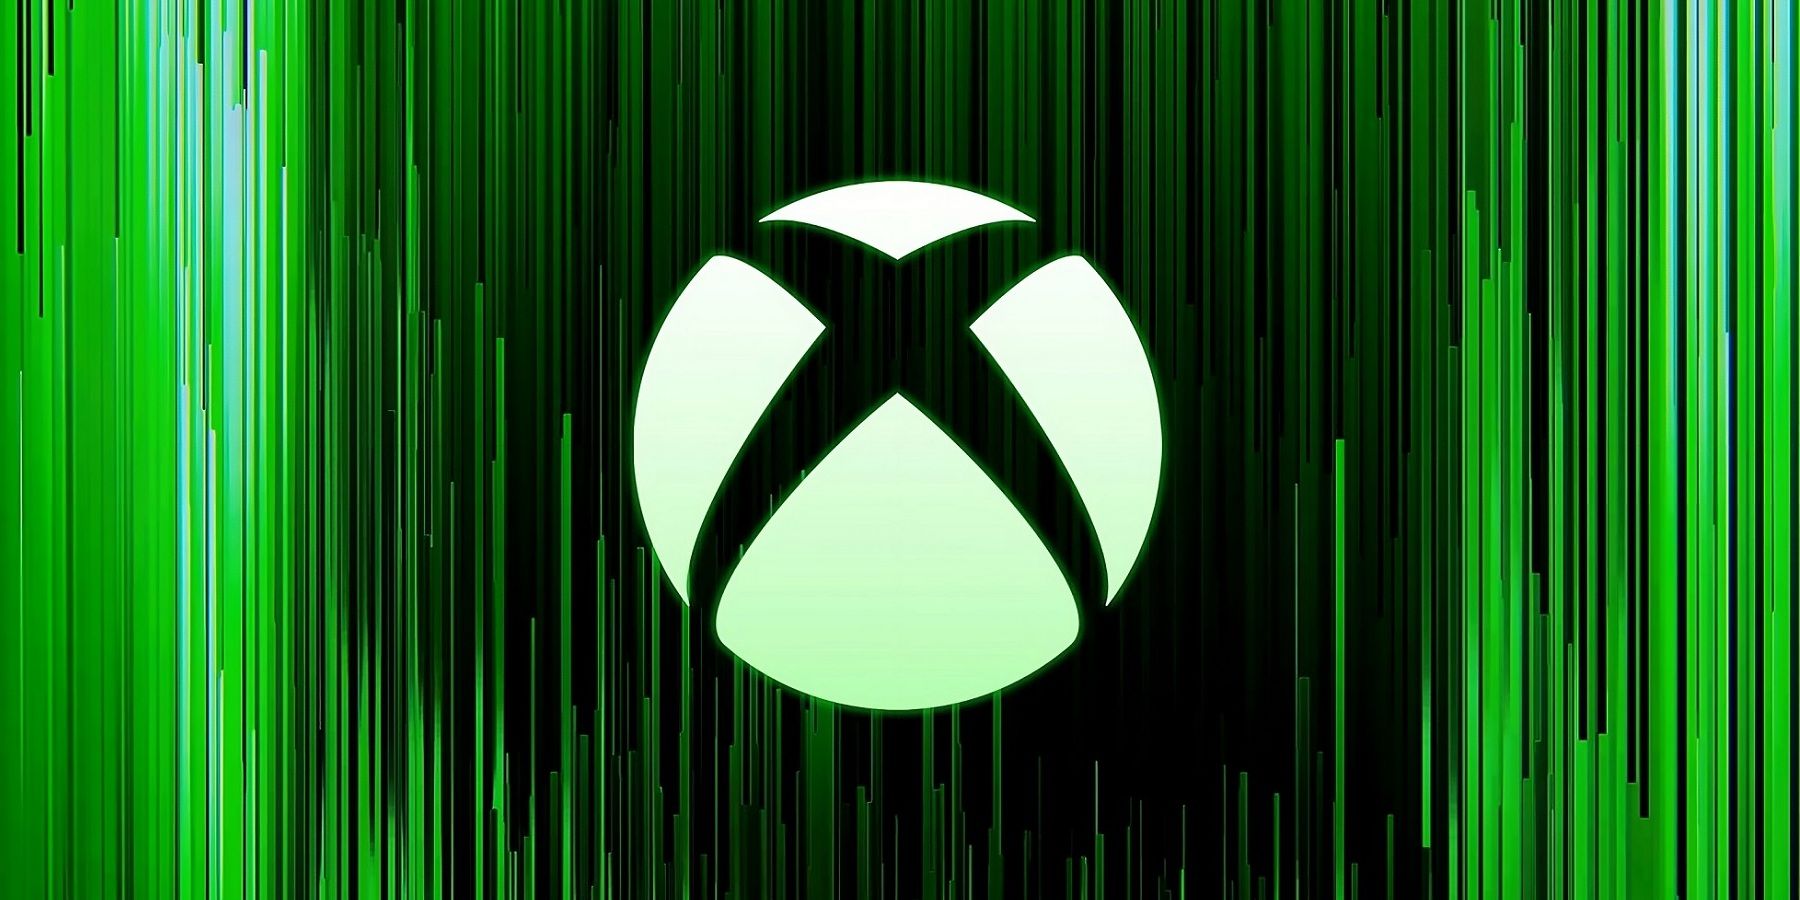 Rumor: One of the Most Popular Games Ever Could Be Coming to Xbox